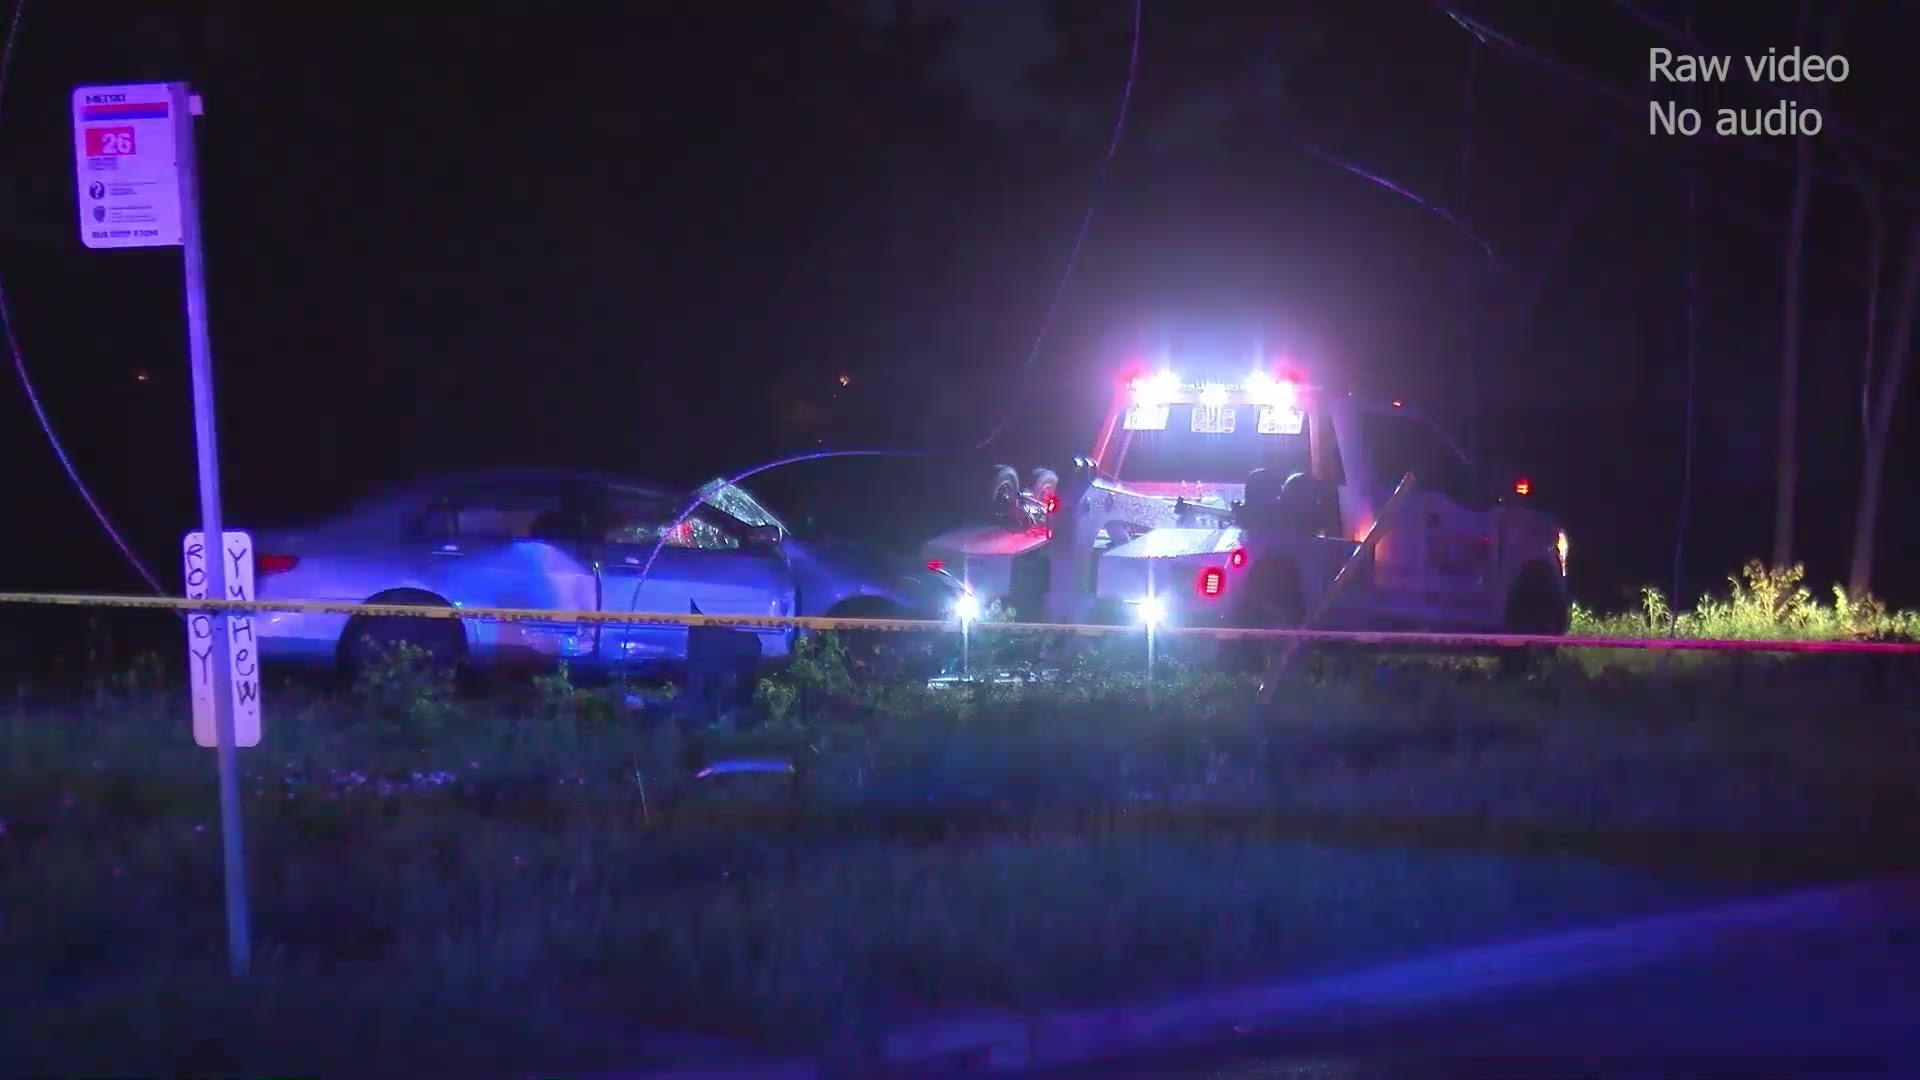 A 17-year-old driver was killed after leaving the roadway and crashing into a power pole in northeast Houston on Tuesday evening, police said.